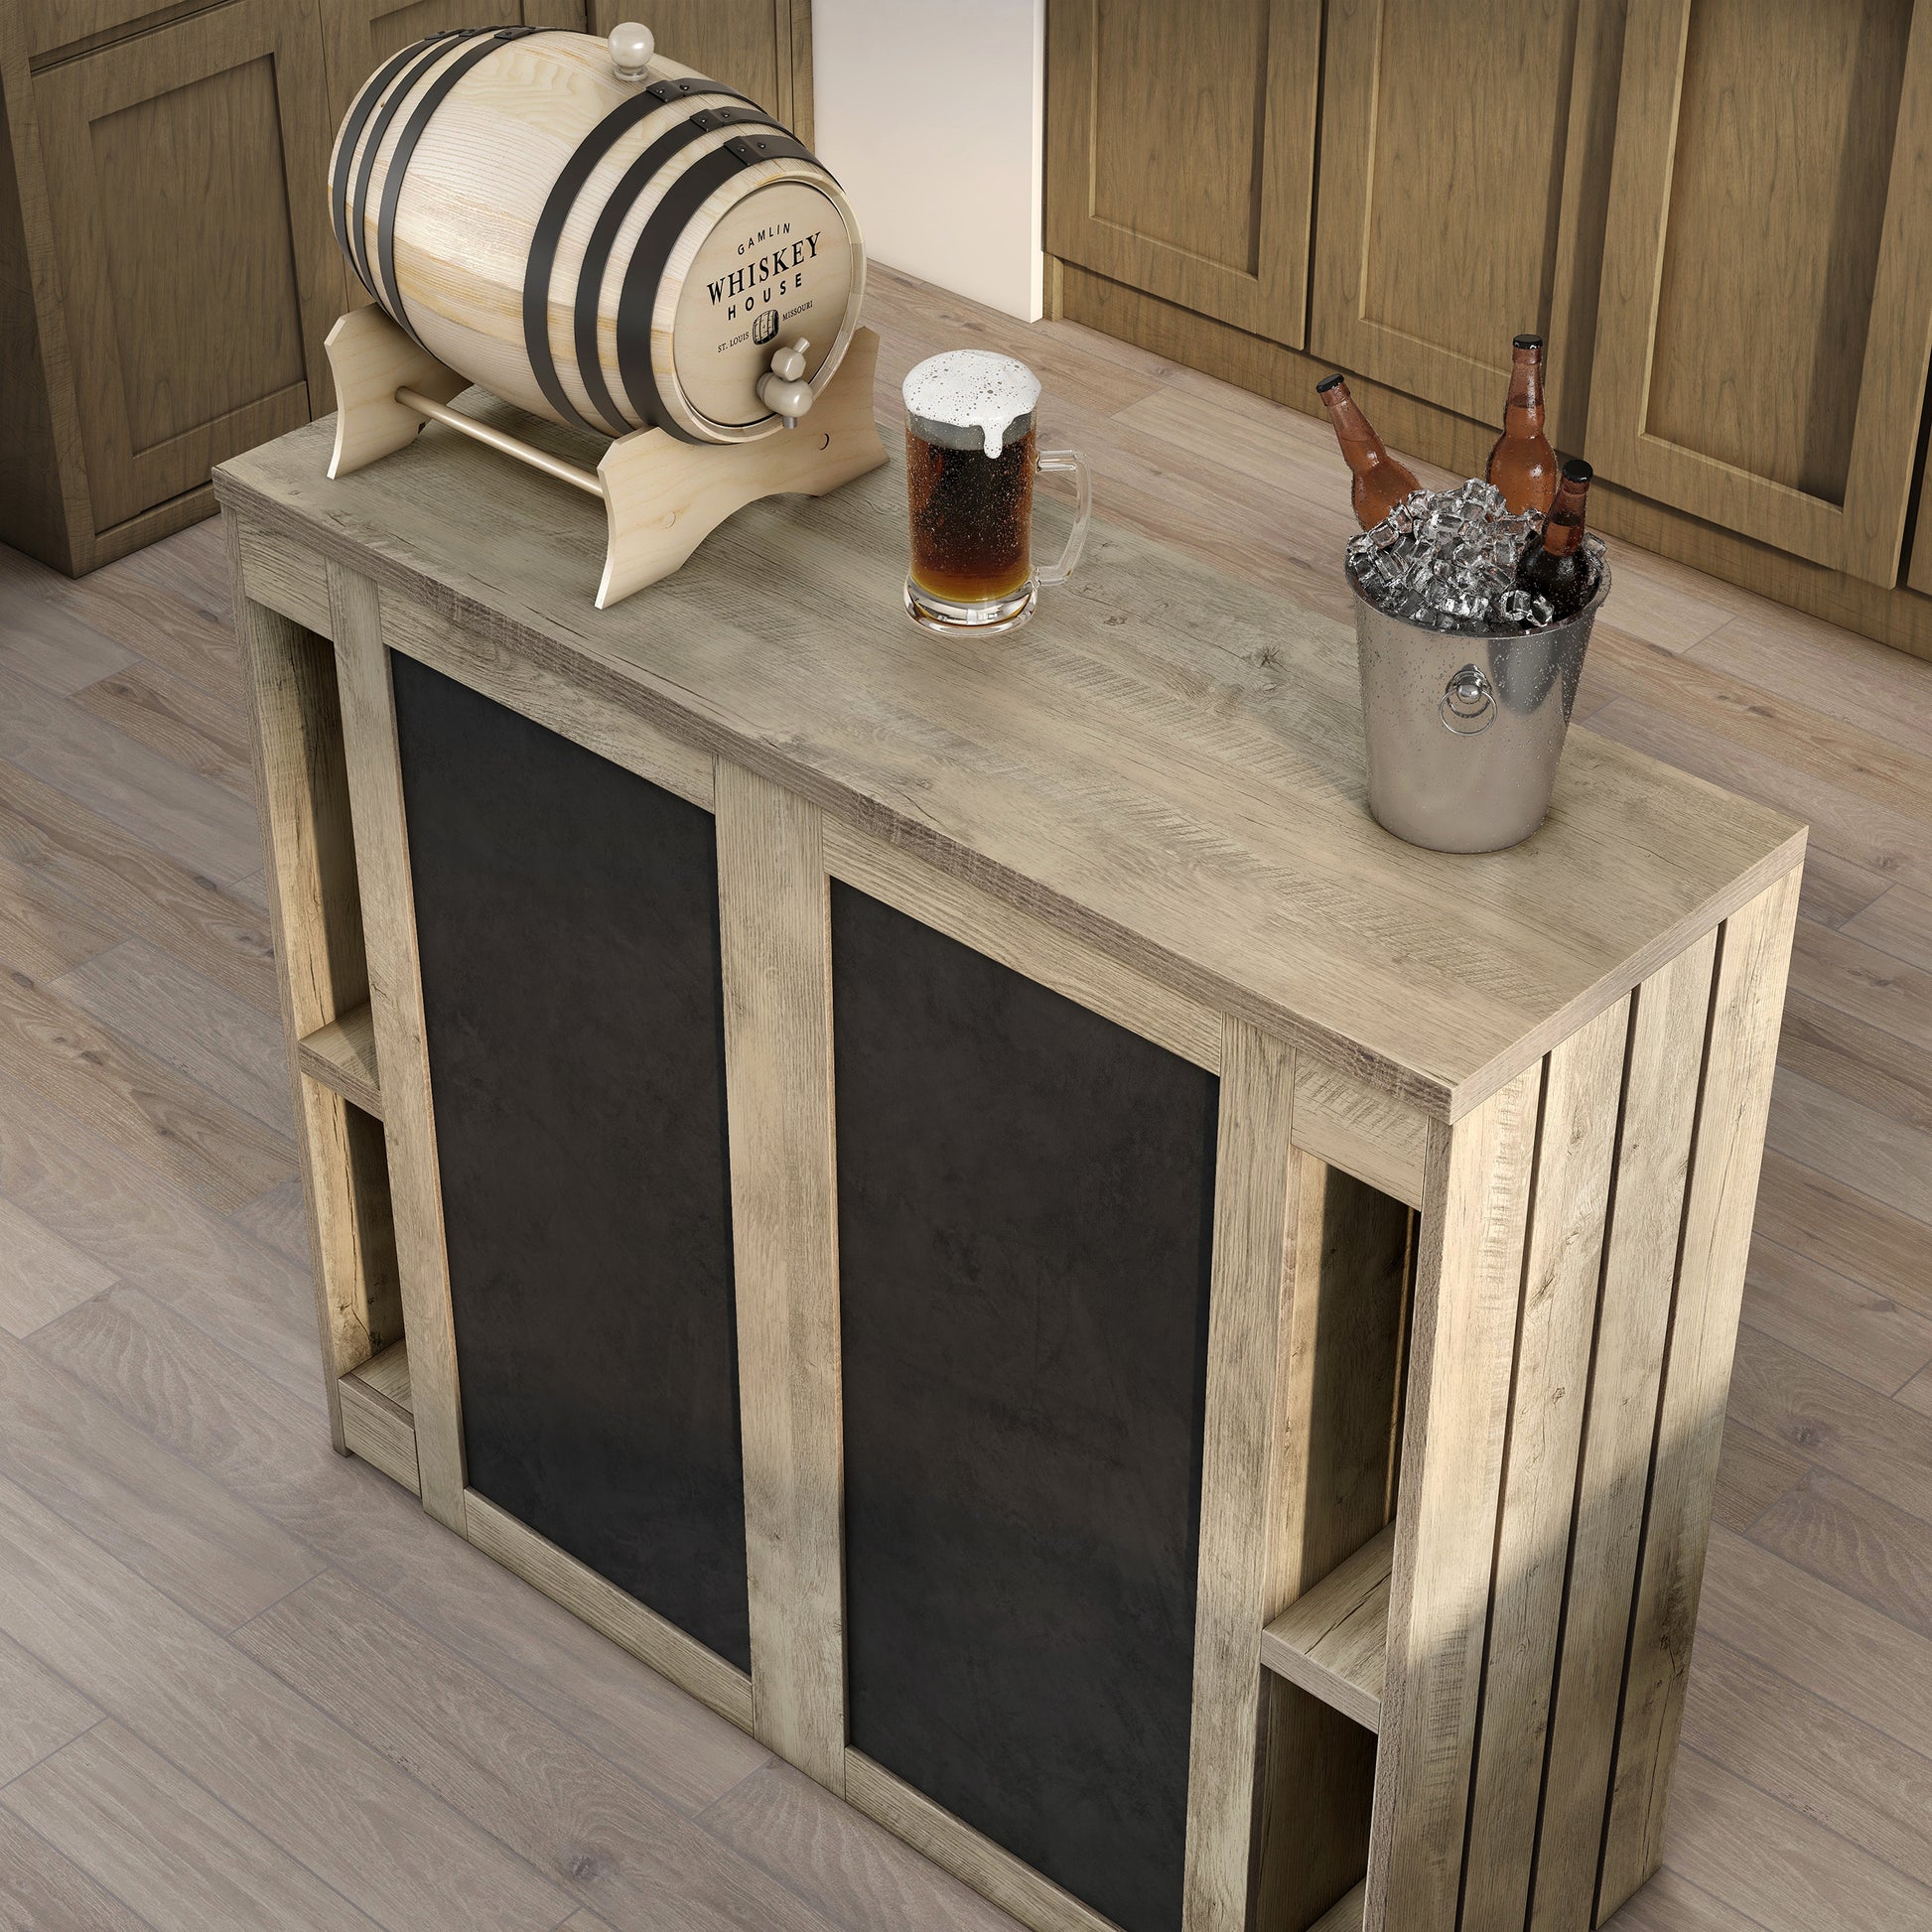 Left angled bird's eye view of a rustic weathered oak nine-shelf home bar with chalkboard doors in a living space with accessories